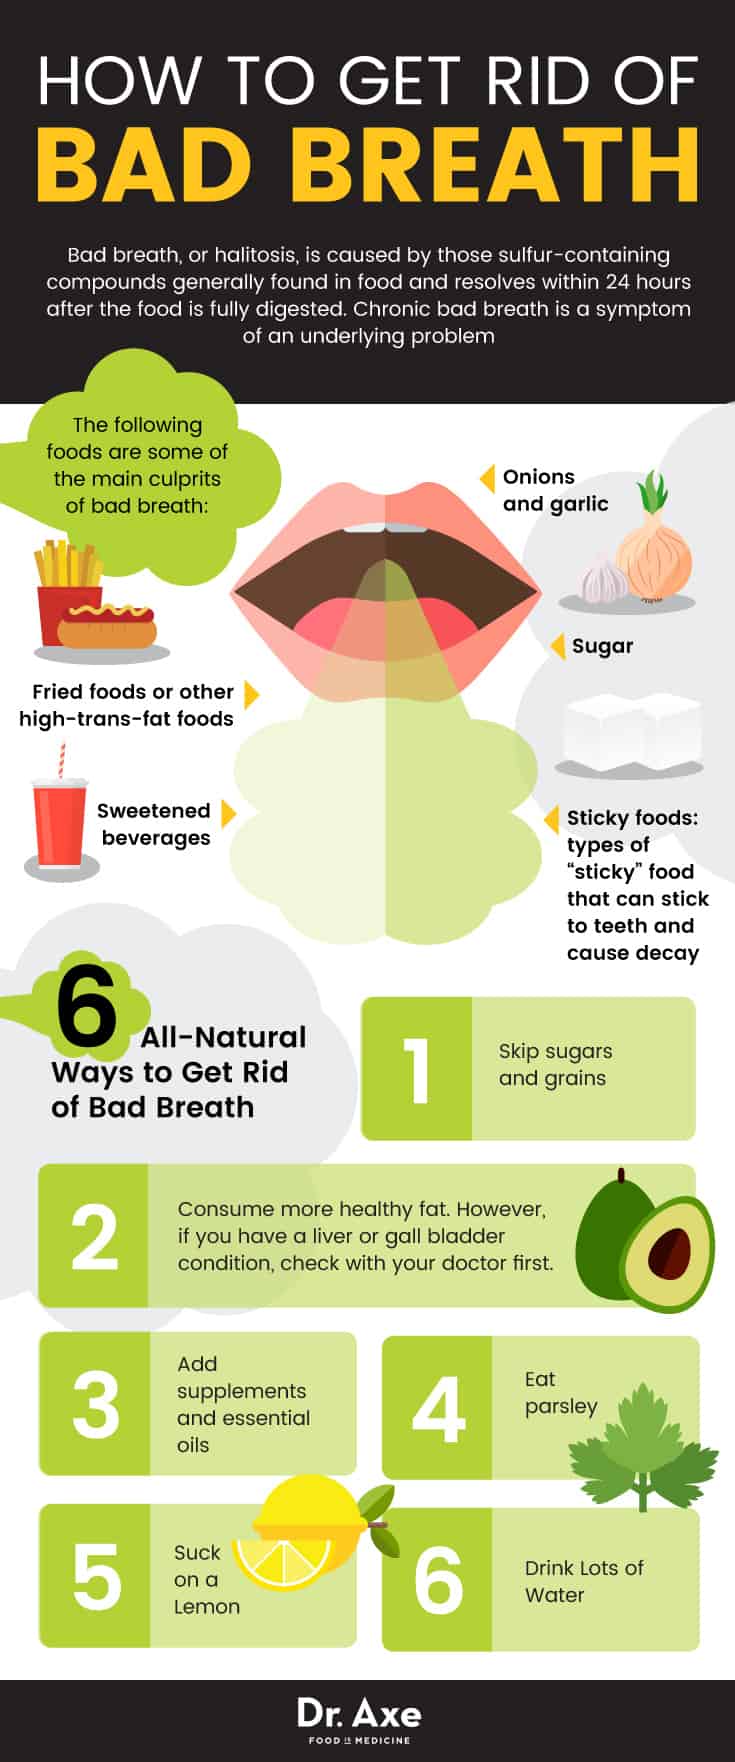 How to get rid of bad breath: 6 natural ways - Dr. Axe